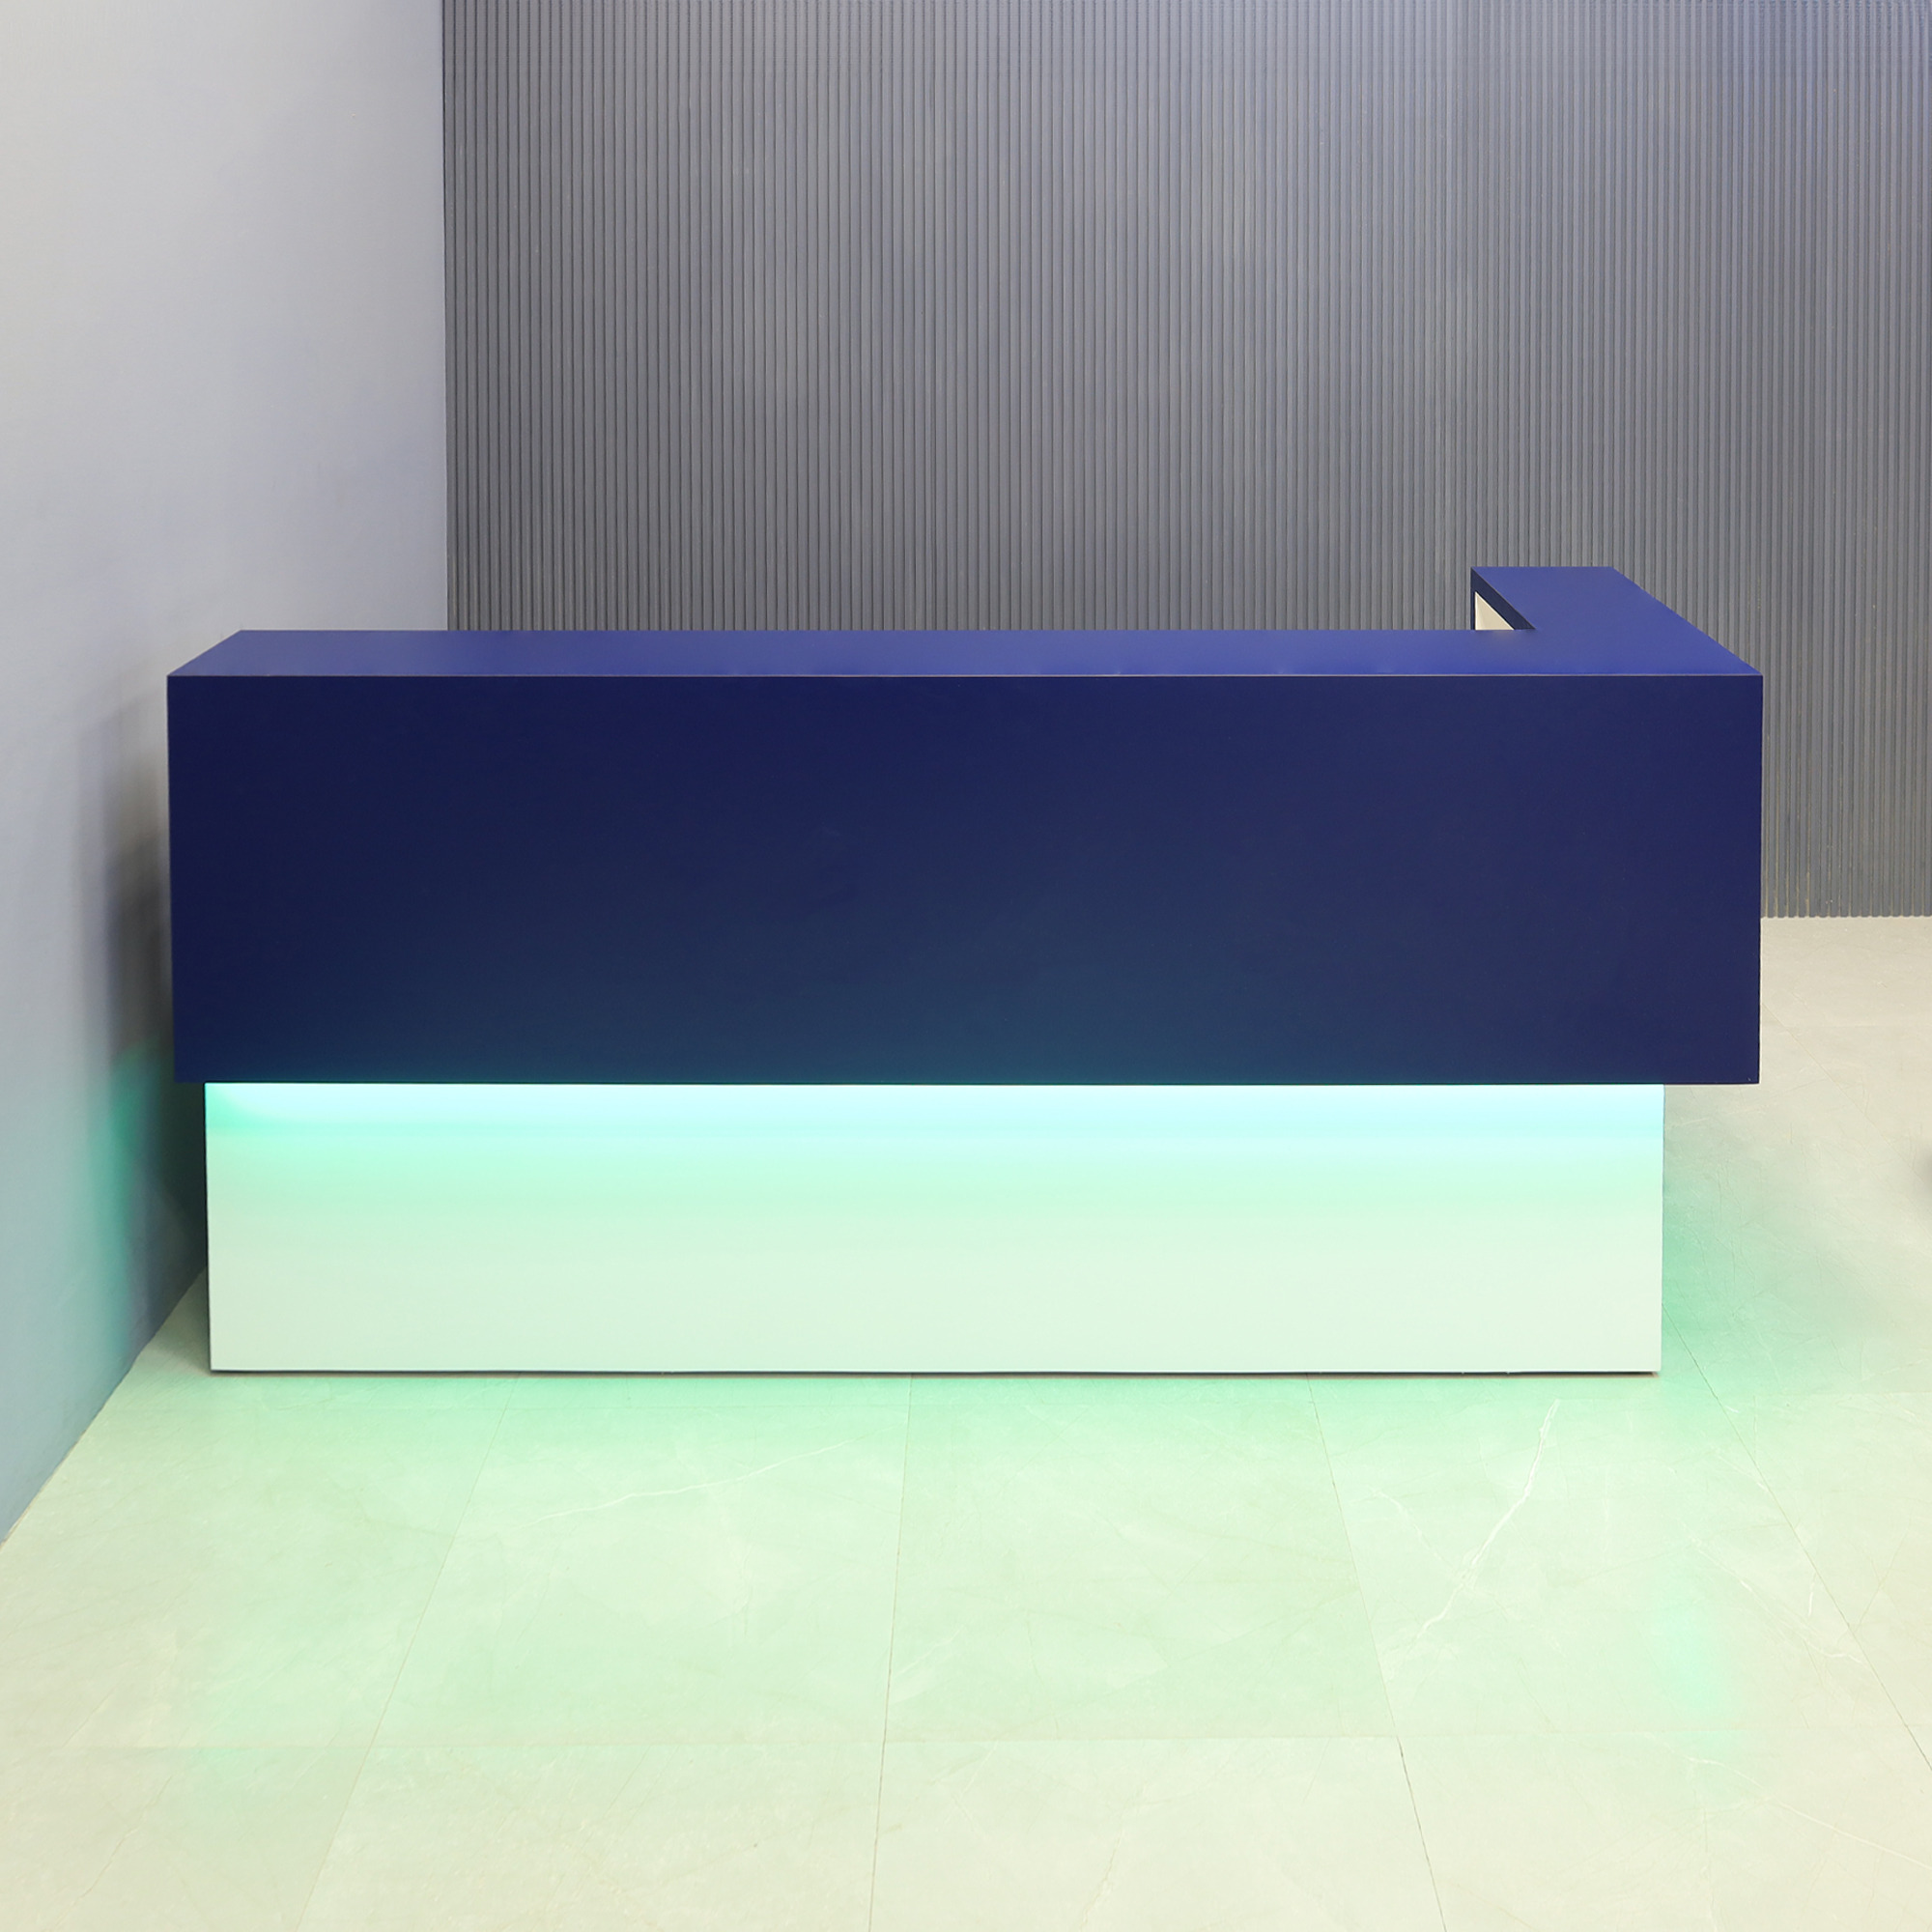 90-inch San Francisco L-Shape Reception Desk, right l-panel side when facing front in blue navy matte laminate counter and white matte laminate desk, with color LED, shown here.